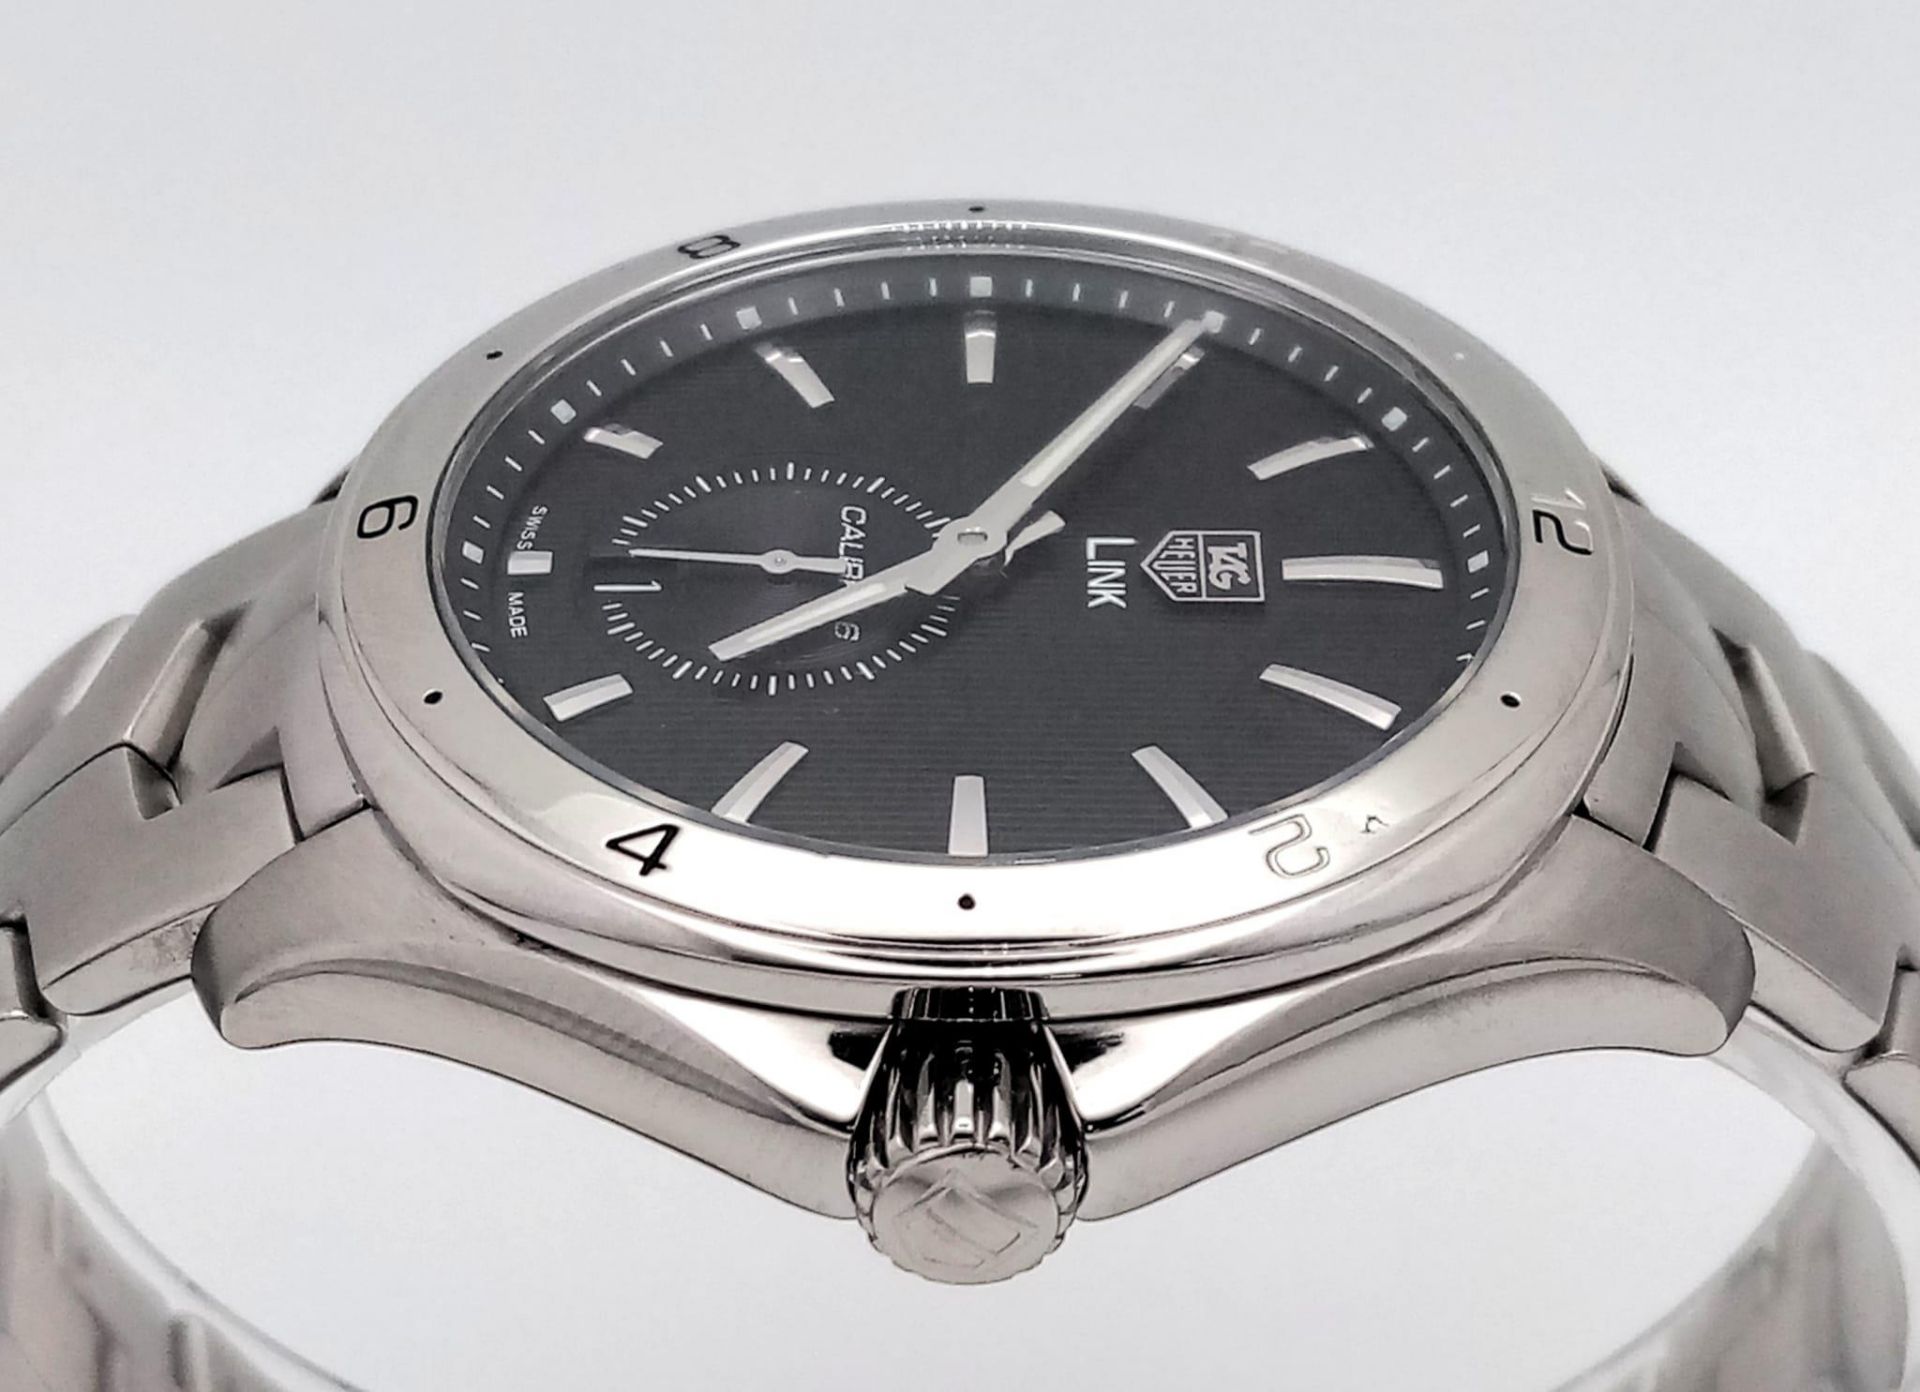 A Tag Heuer Link Calibre 6 Automatic Watch. Stainless steel bracelet and case - 41mm. Black dial - Bild 5 aus 9